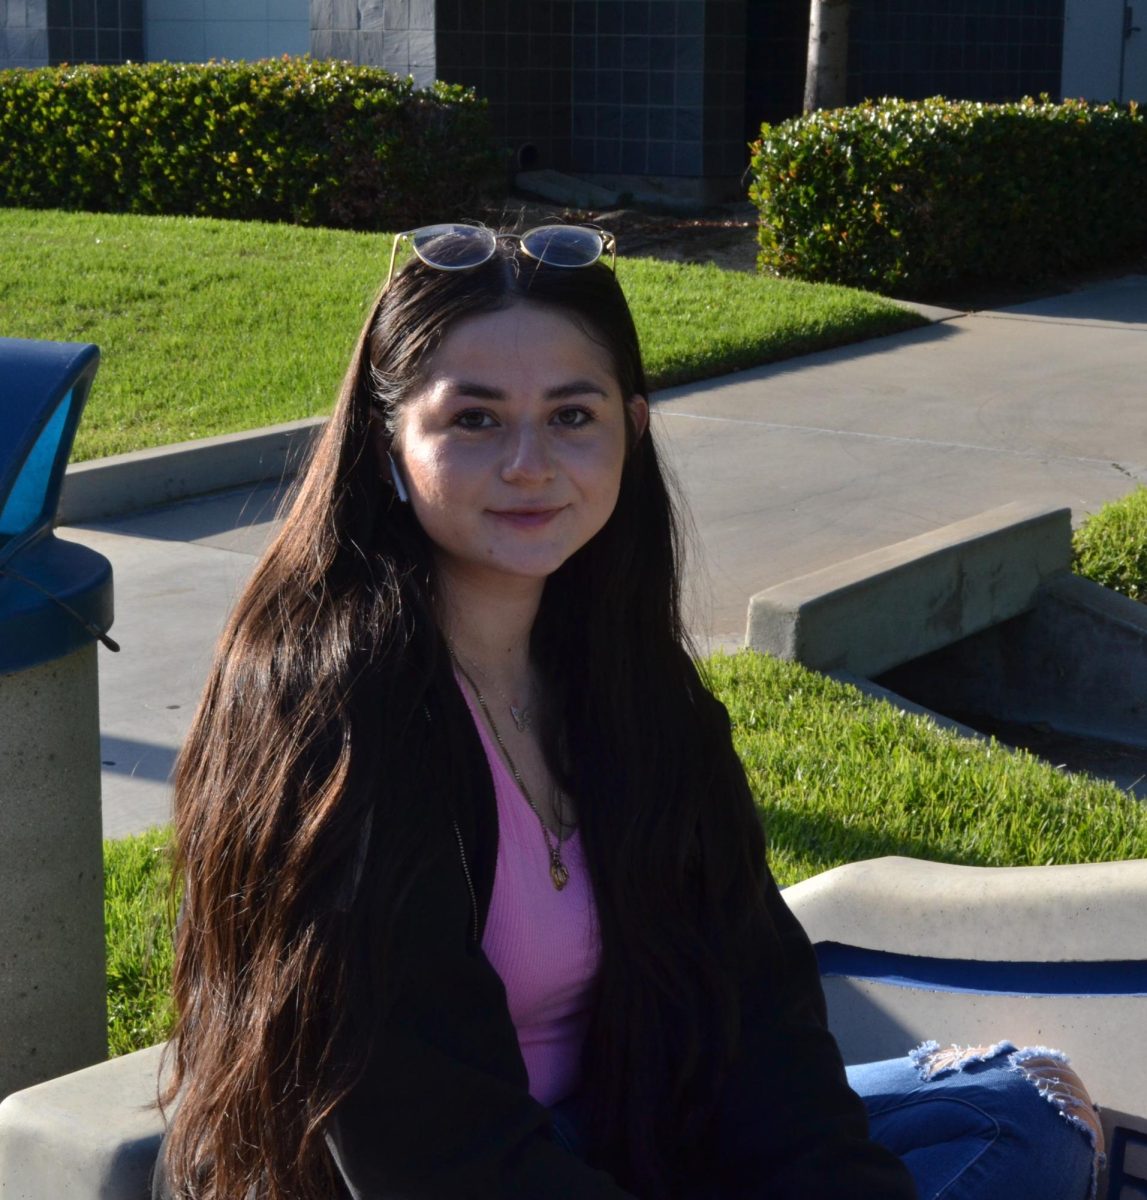 Freshman, Cerritos College student Clarissa Garcia expressed that she grew up believing that the American flag represents freedom and that is how she views the American flag. Photo credit: Melissa Clemente